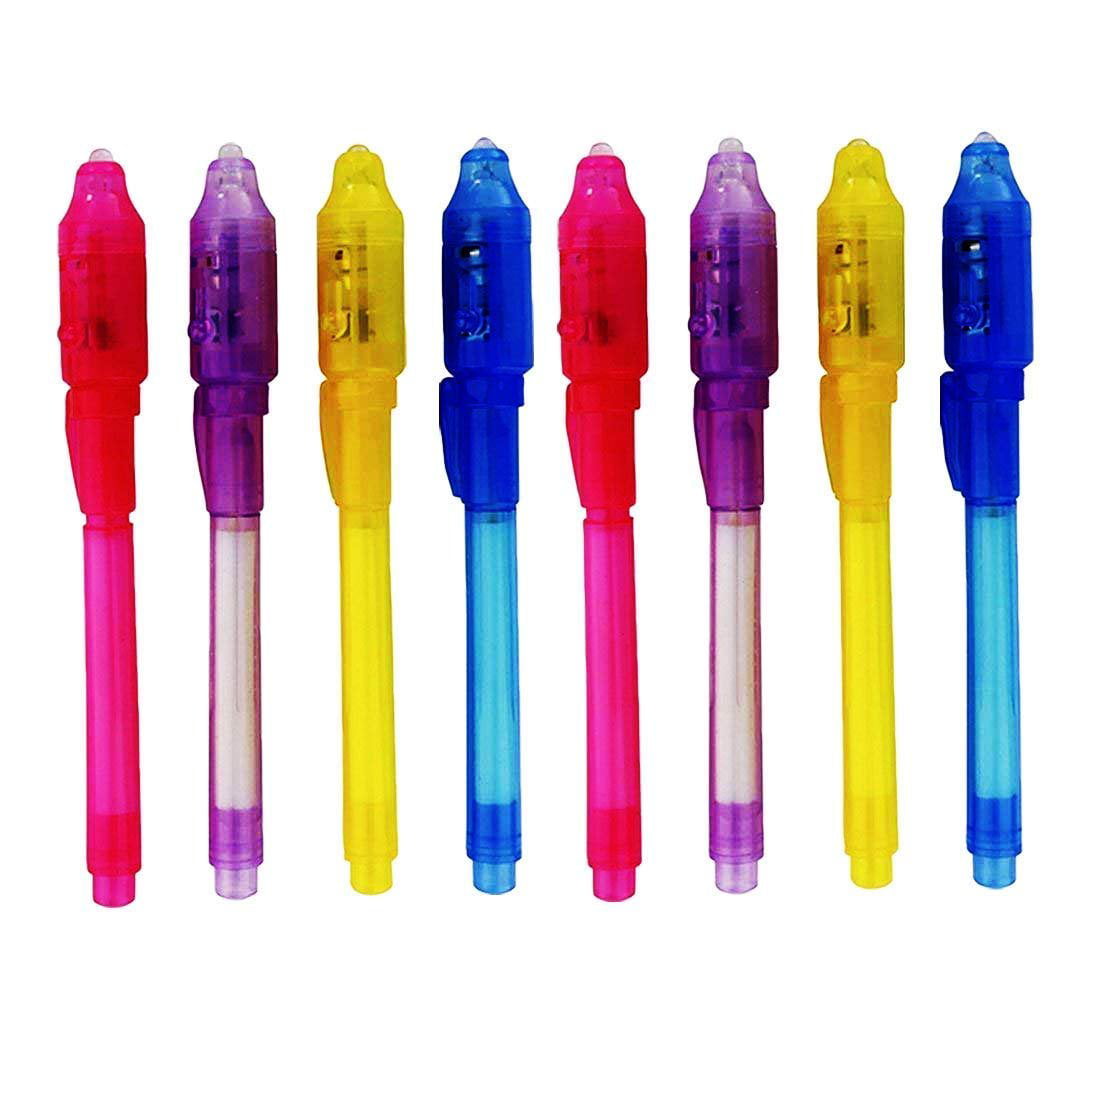 30 Pack UV Pen with Disappearing Ink Marker and Blacklight Pen for Secret Message MALEDEN Invisible Ink Pens Kids Party Favors and Stocking Stuffer 